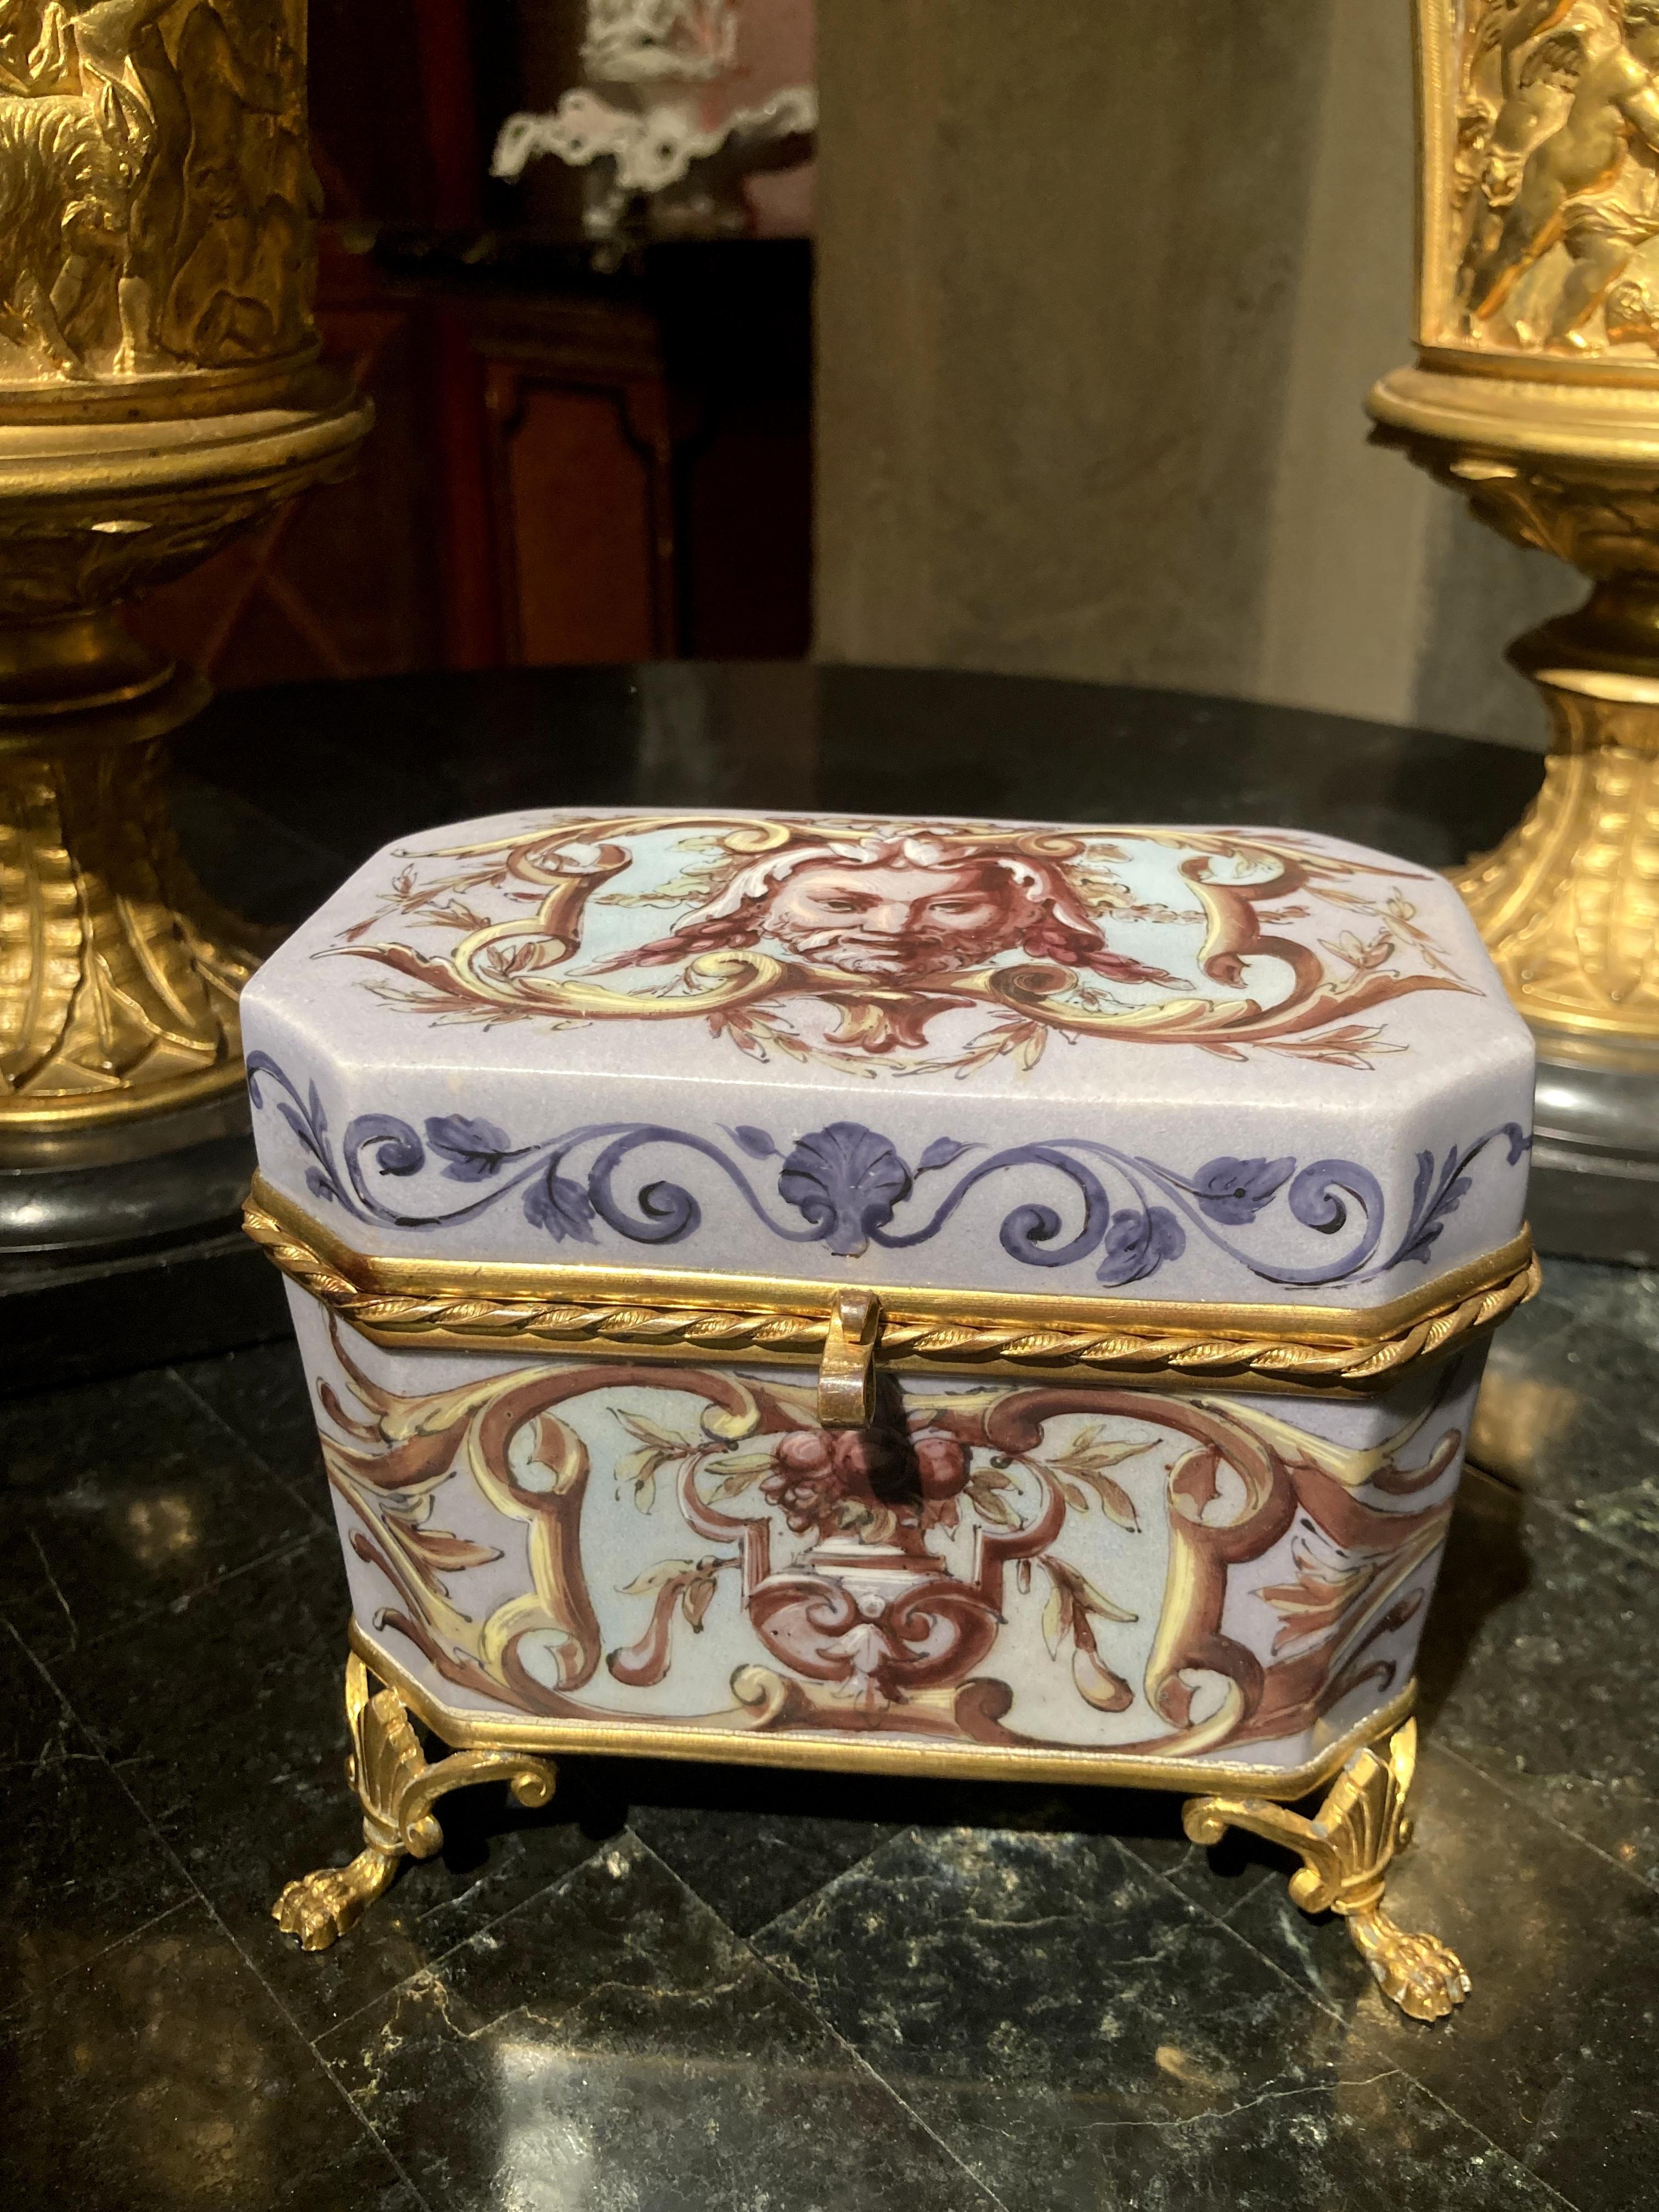 French 19th Century Empire Porcelain and Gilt Bronze Decorative Jewelry Box For Sale 9